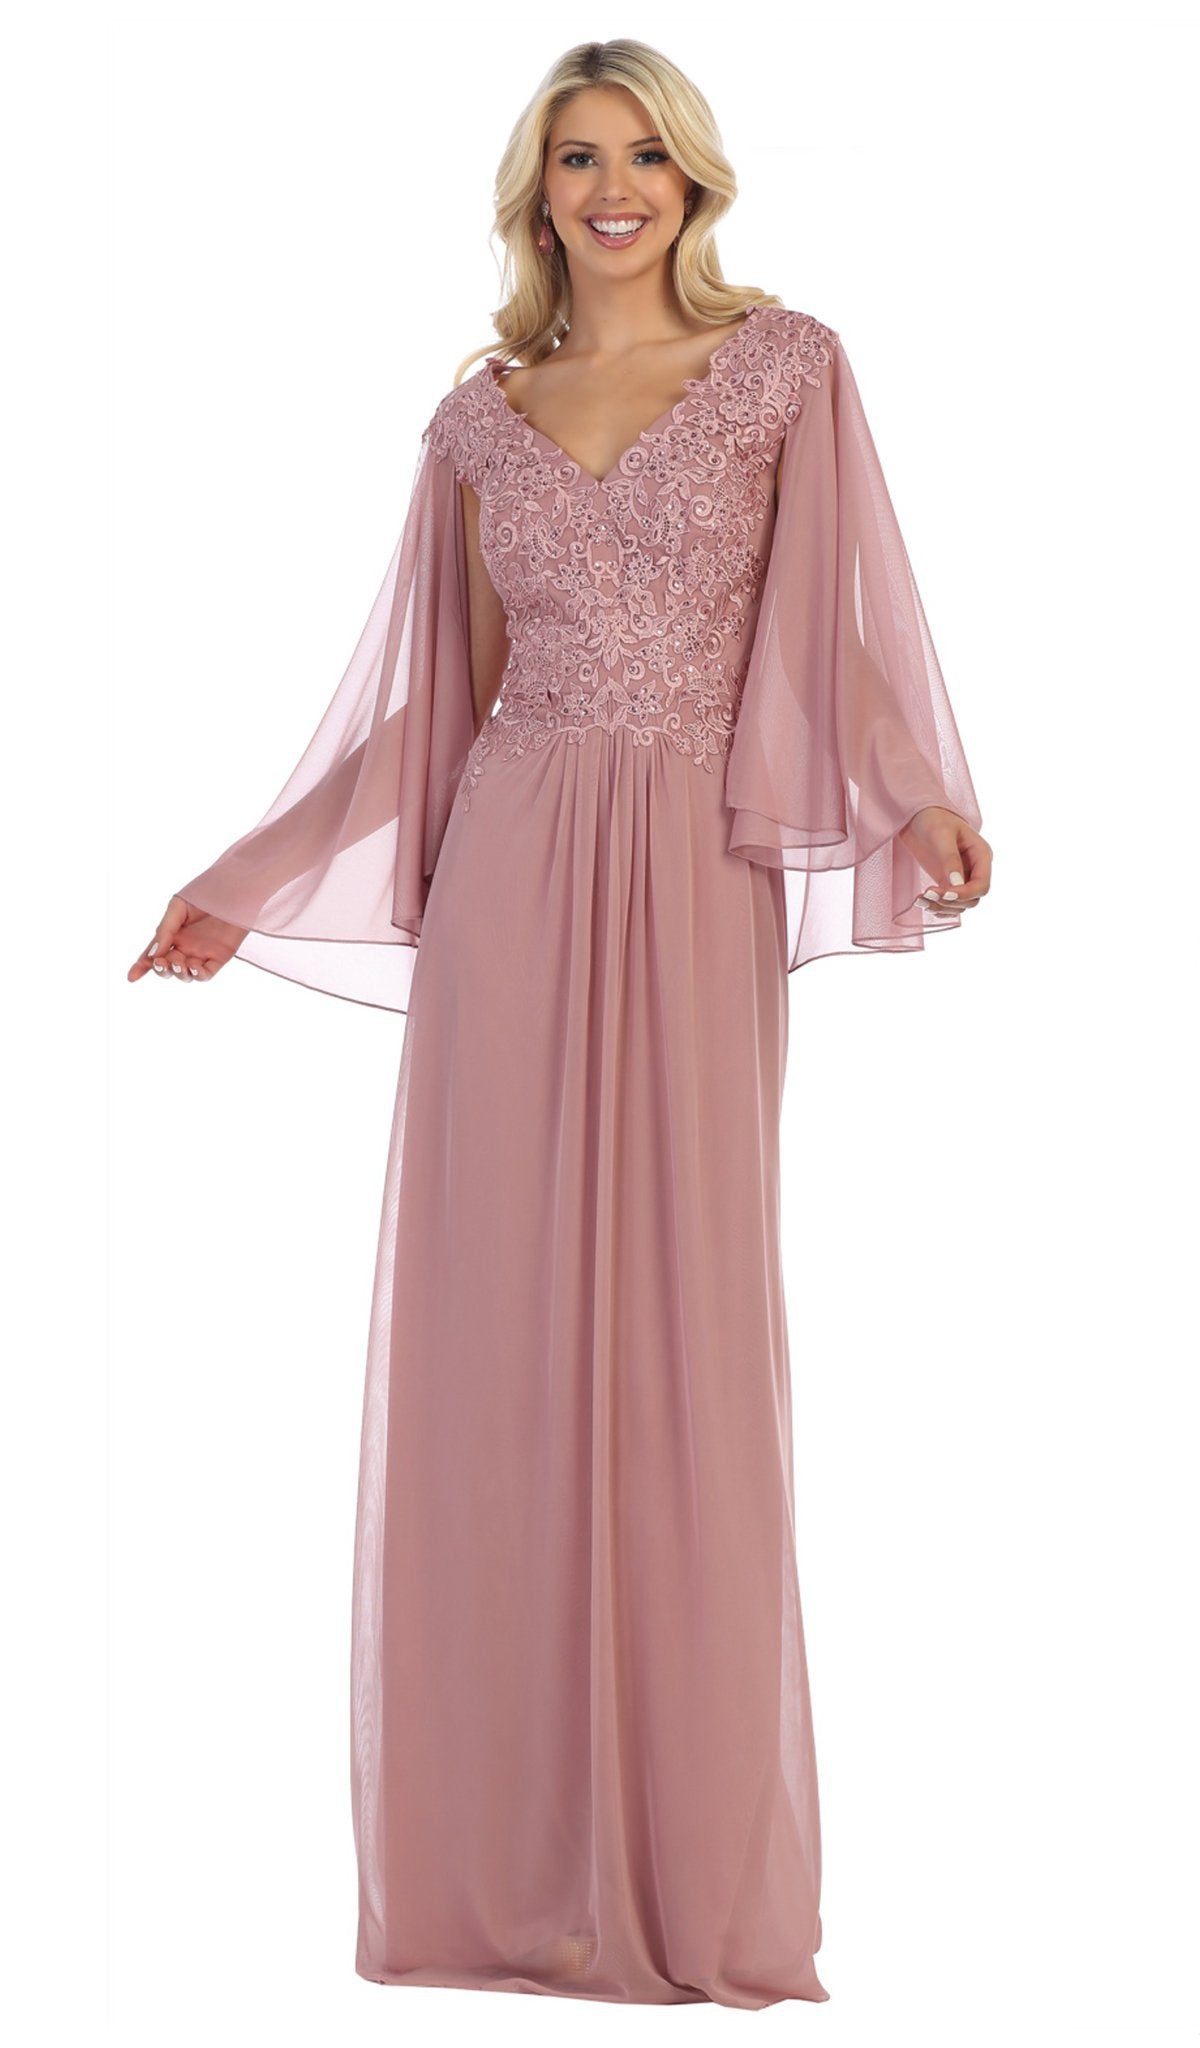 May Queen - MQ1612B Applique V-neck Long Sheath Dress Special Occasion Dress 6XL / Dusty-Rose